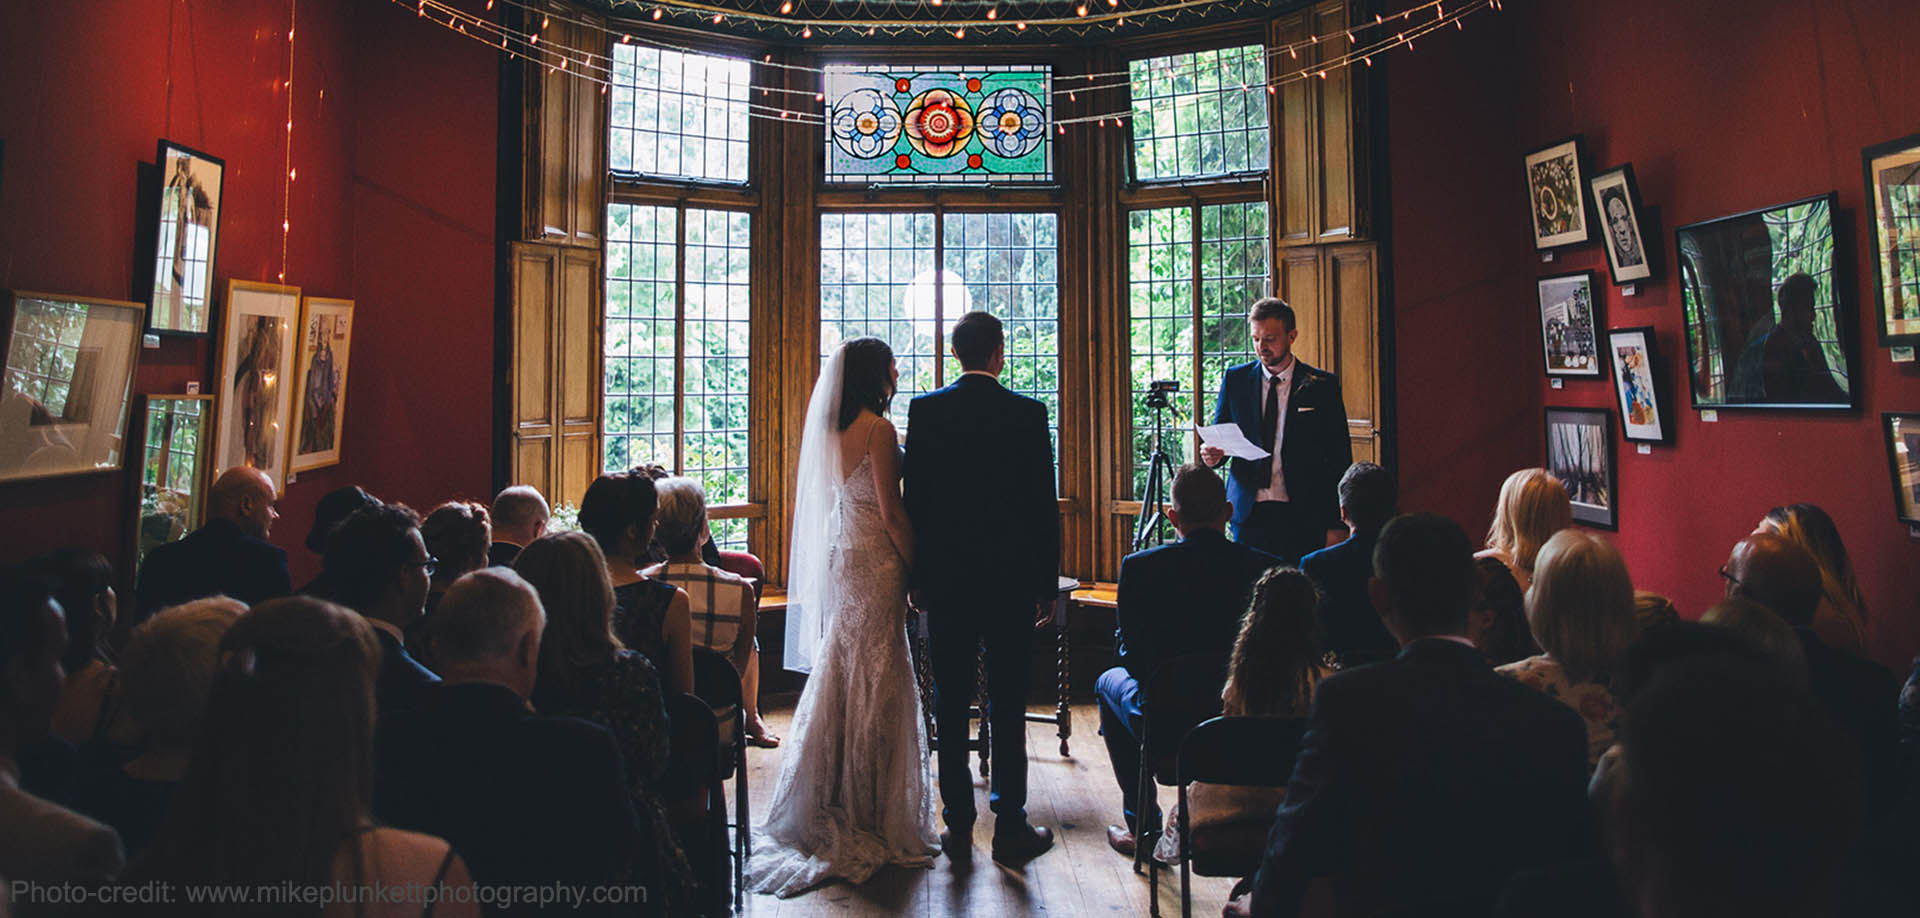 Old Parsonage, Manchester. Wedding Ceremony with our Stained Glass in the Background